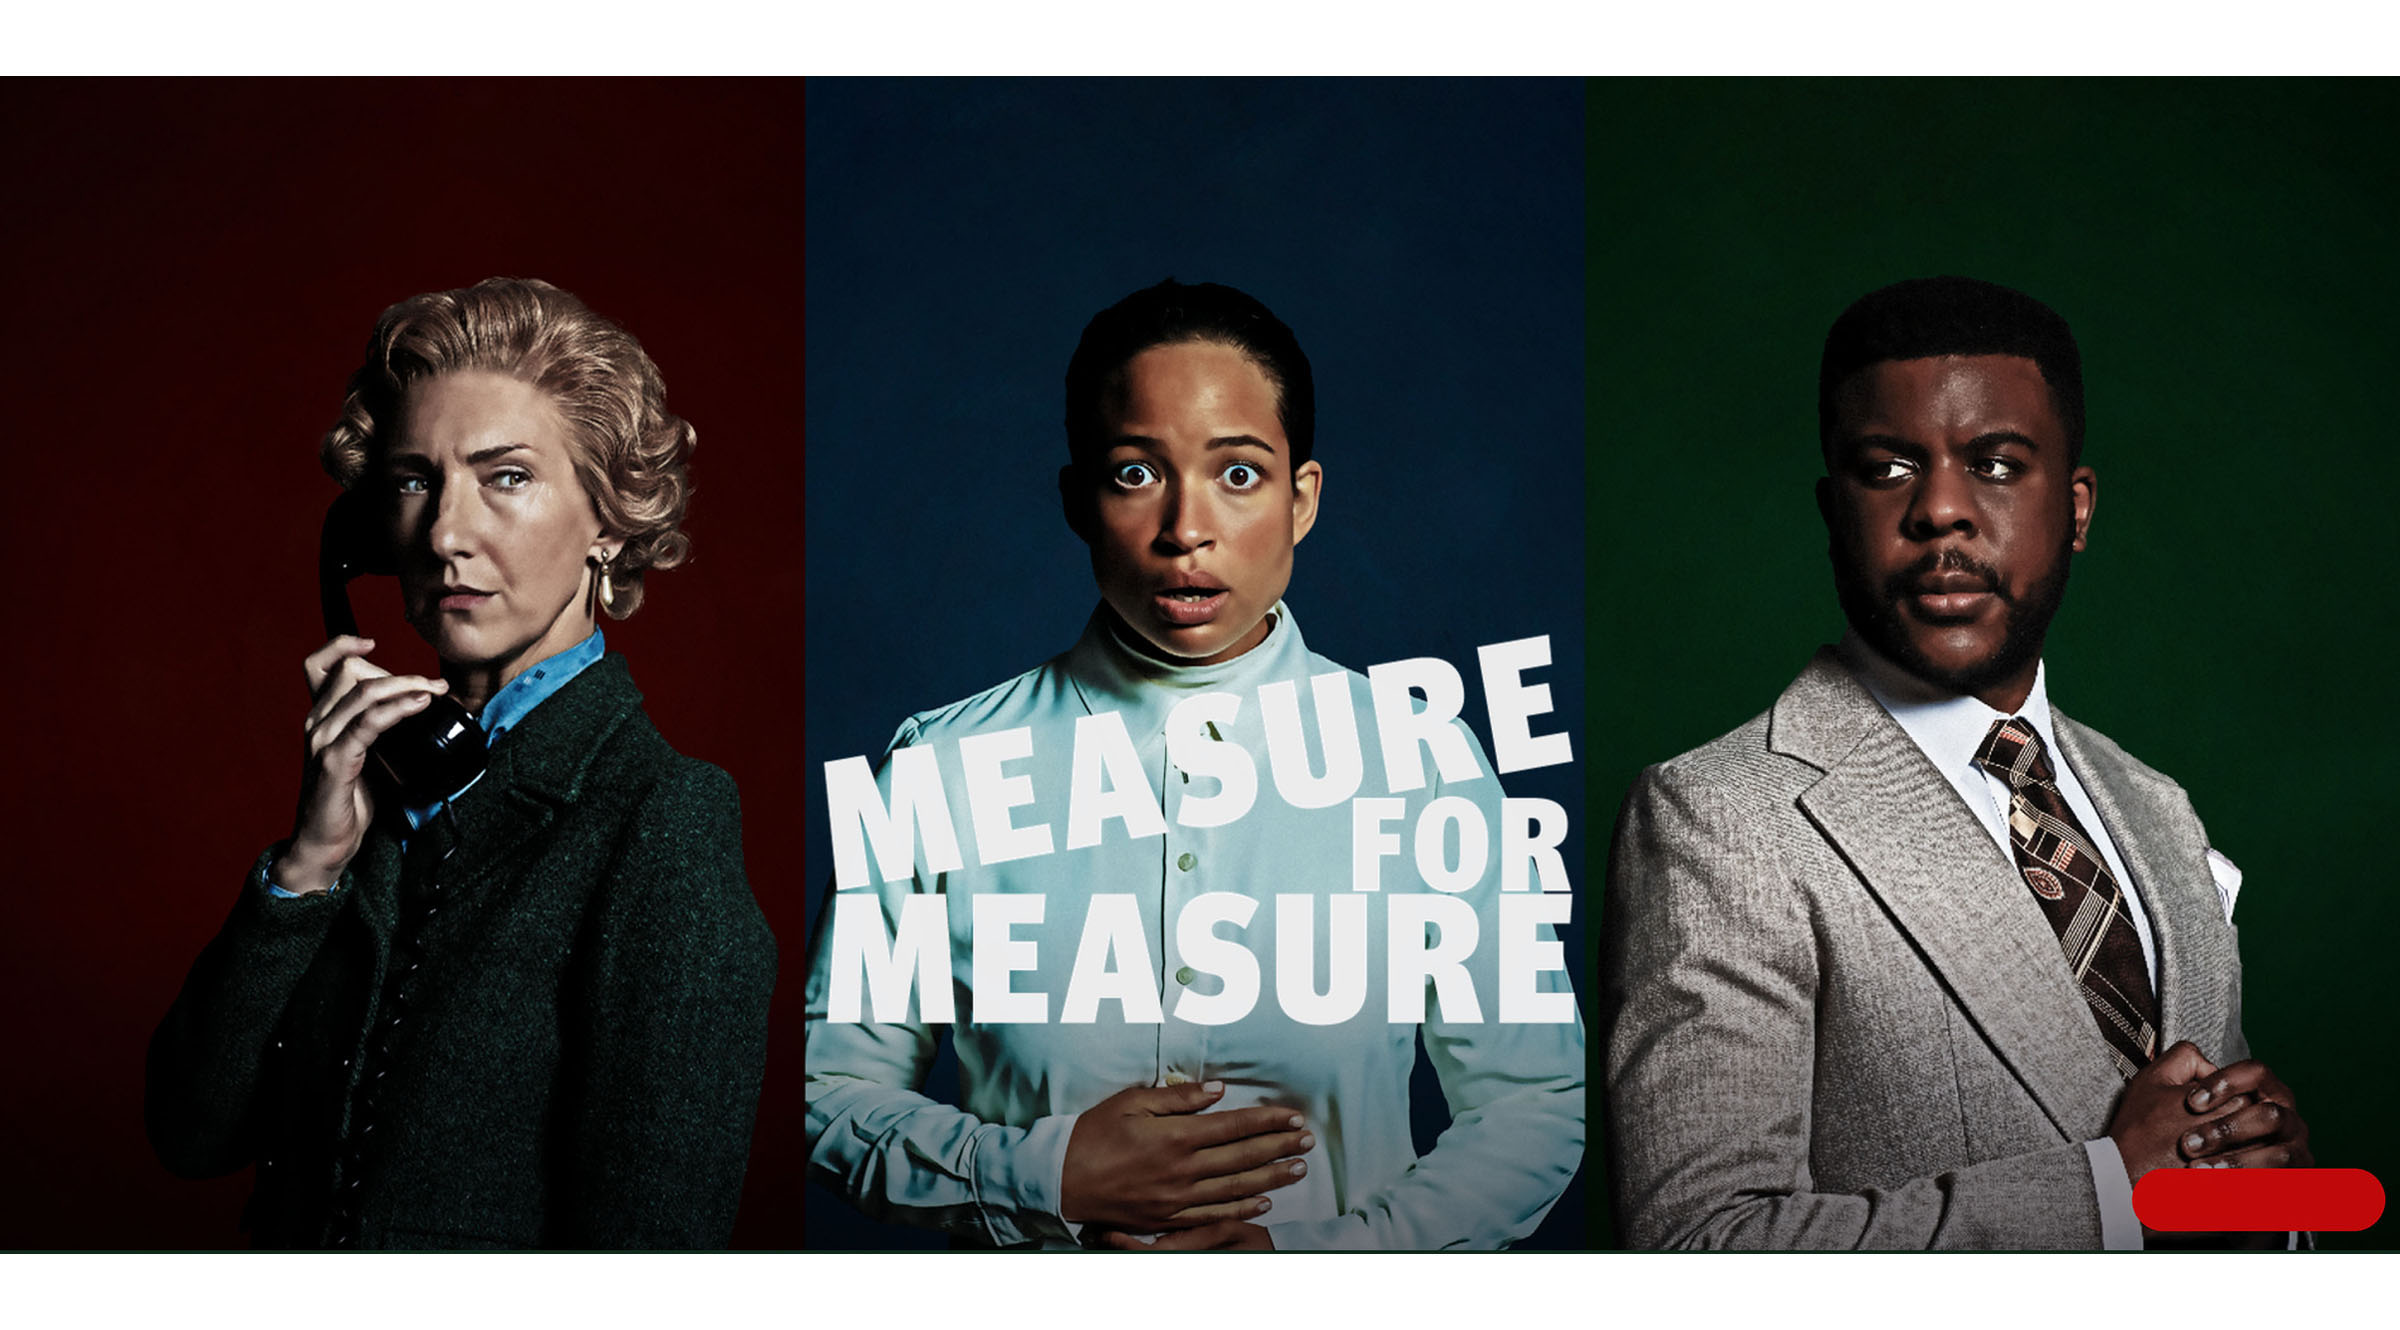 Measure For Measure promotional image for The Globe Theatre